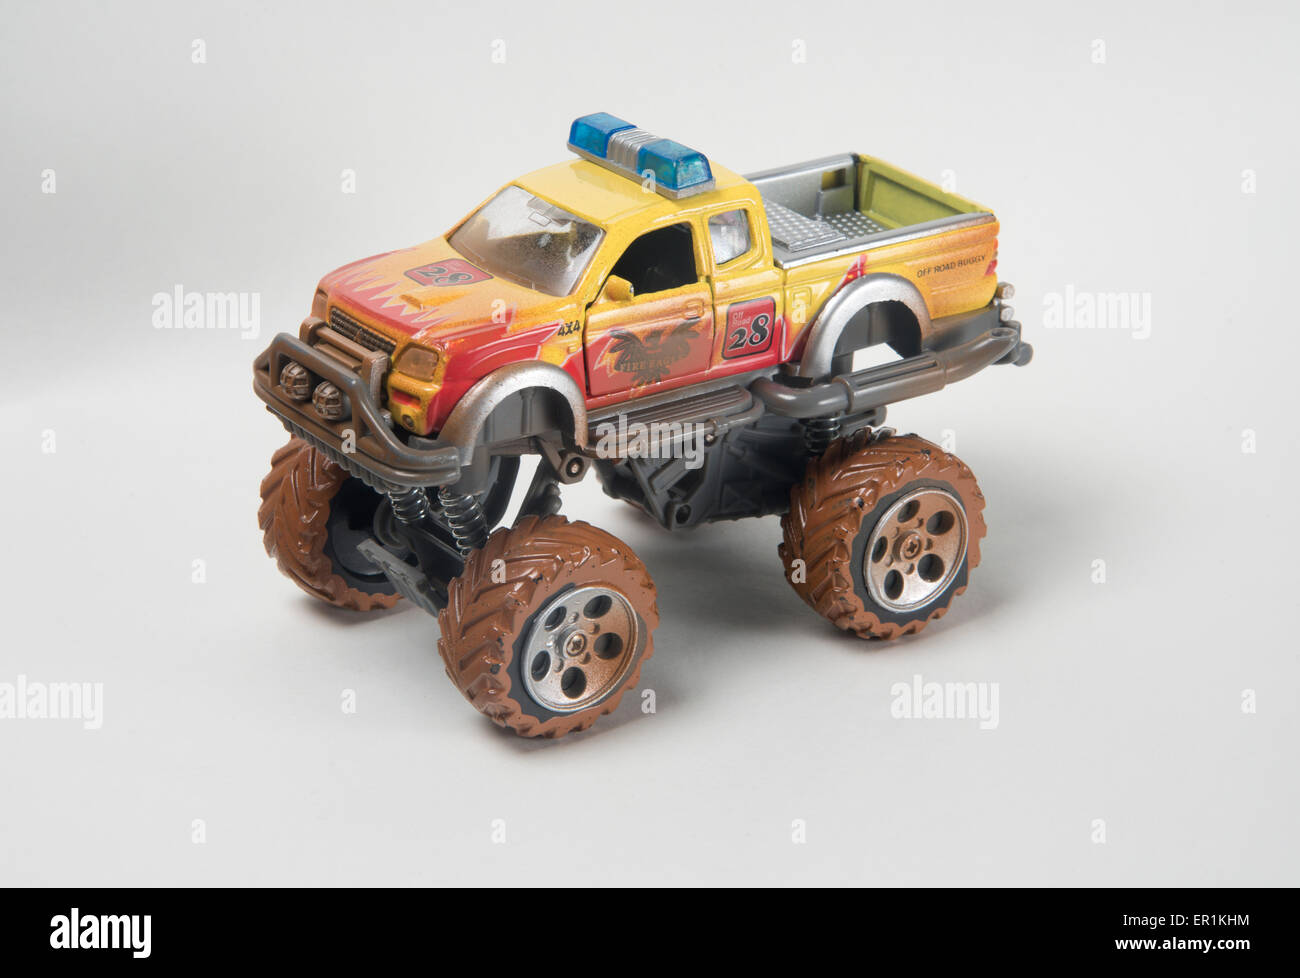 Toy monster truck Stock Photo